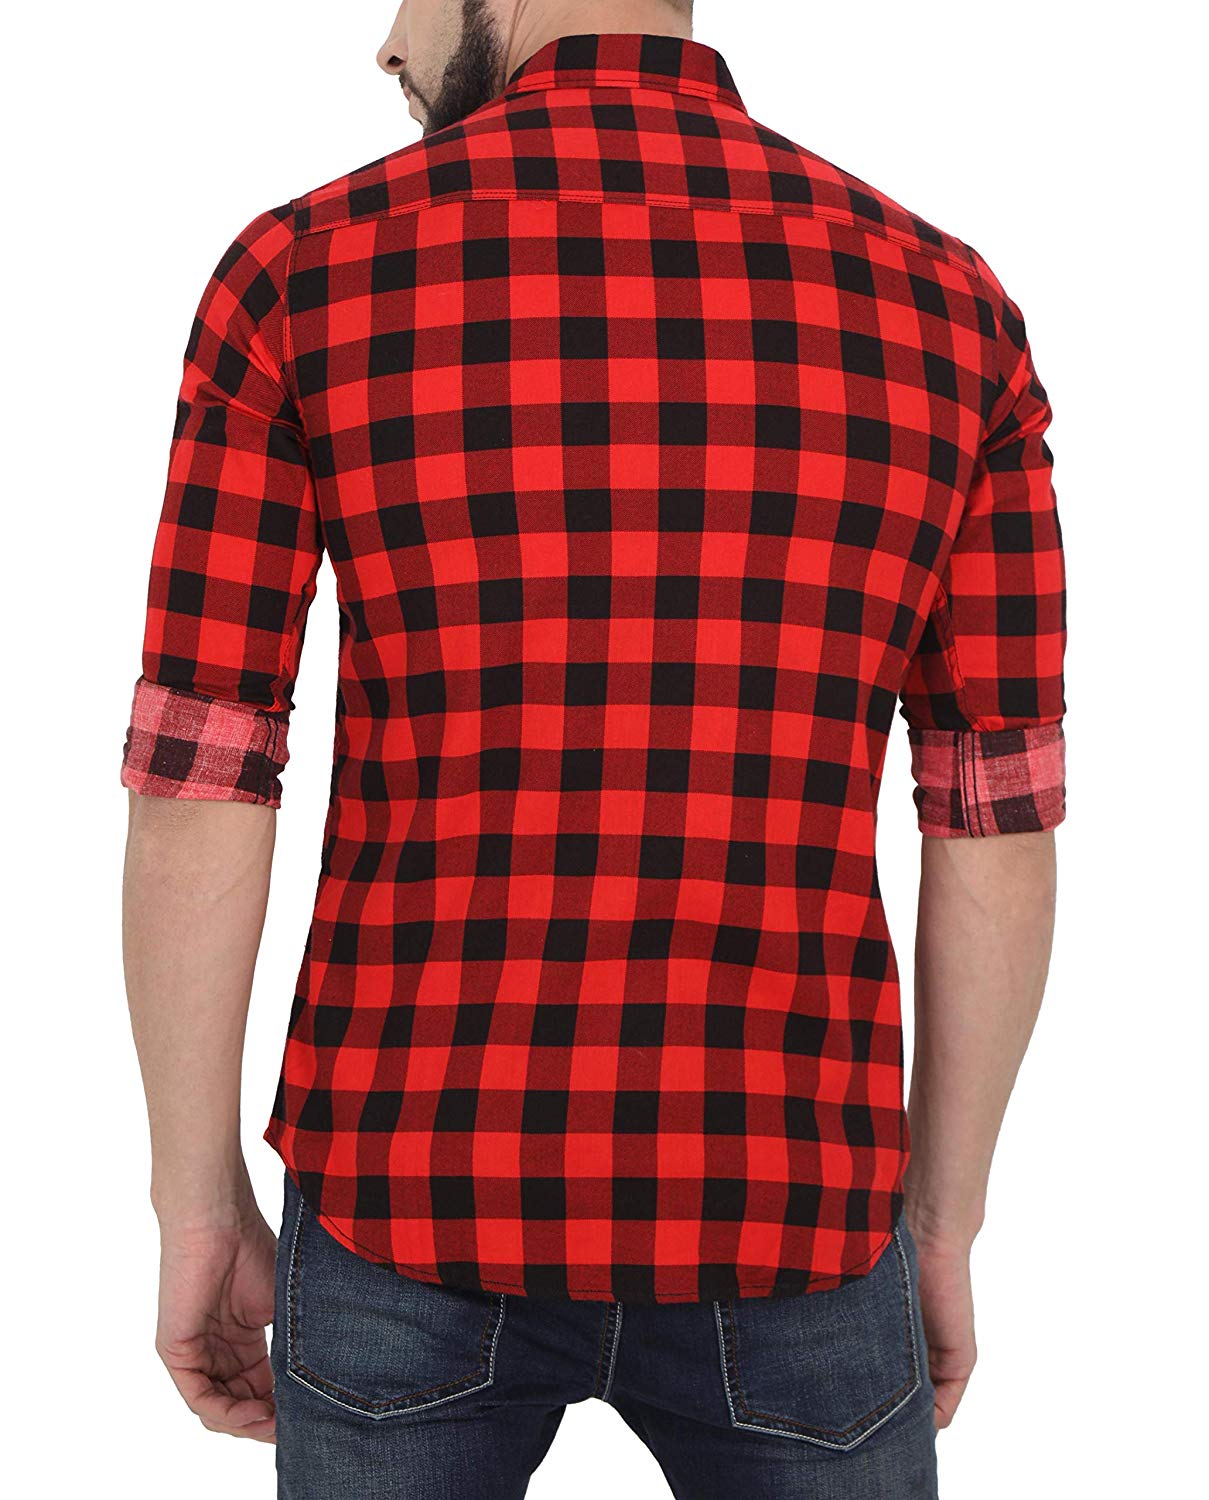 Men's Red Casual Shirt By Classy Moments